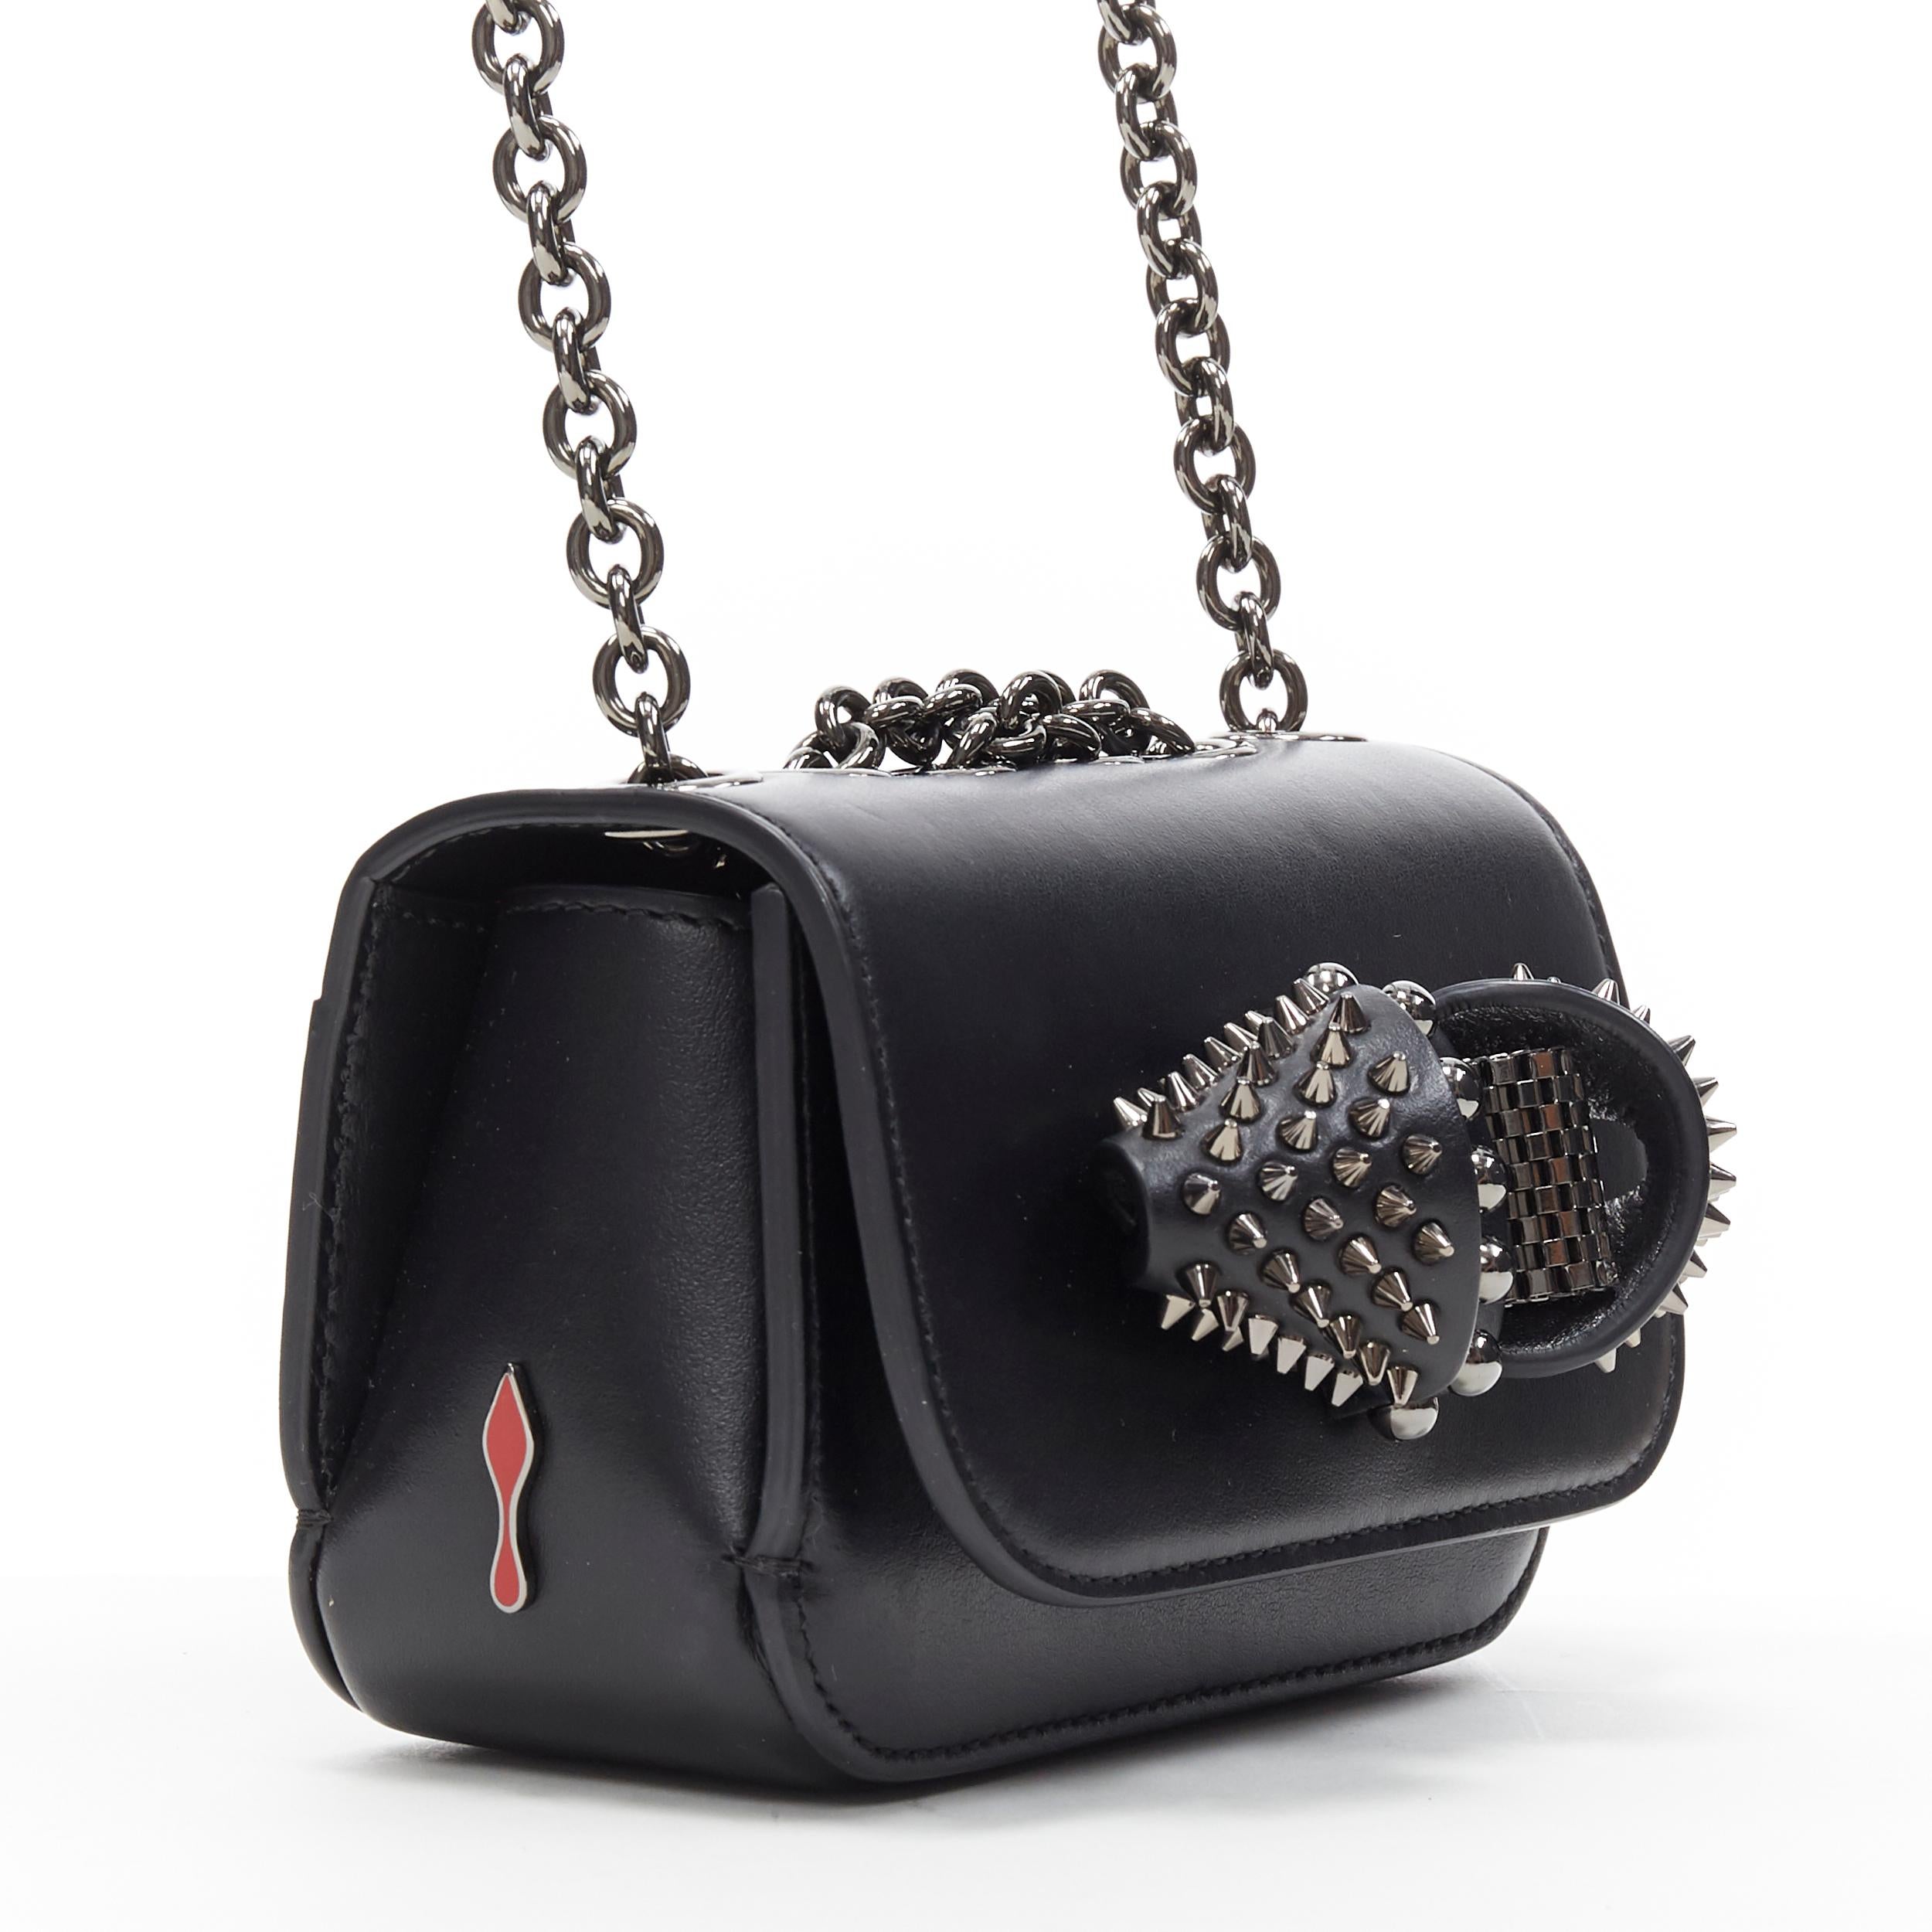 CHRISTIAN LOUBOUTIN Sweet Charity Mini black spike stud bow chain shoulder bag
Brand: Christian Louboutin
Designer: Christian Louboutin
Model Name / Style: Sweet Charity
Material: Leather
Color: Black
Pattern: Solid
Lining material: Leather
Extra